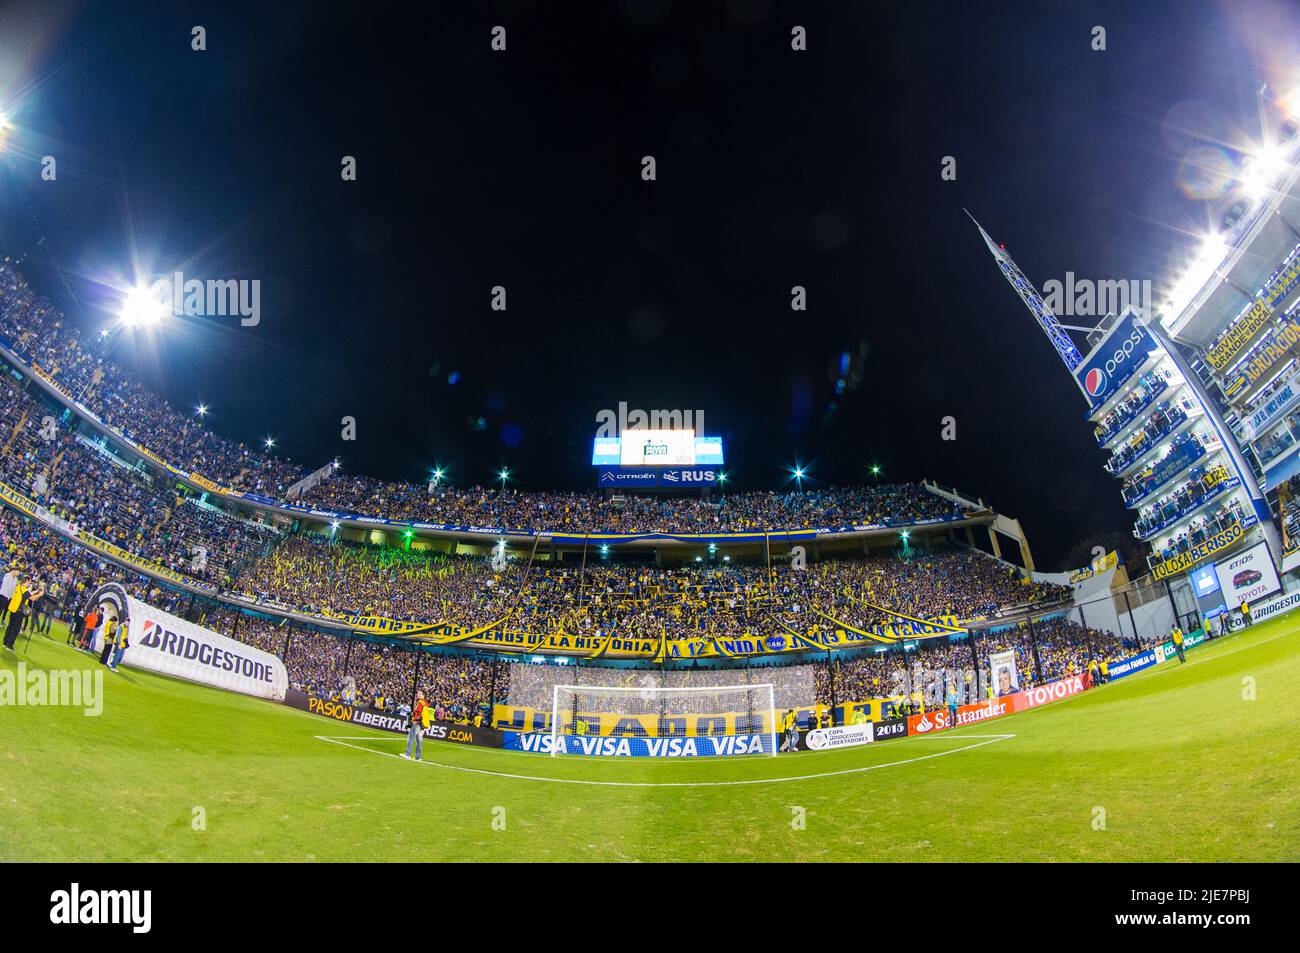 La Bombonera Stadium full of supporters minutes before a 'superclasico' match against River Plate. Stock Photo